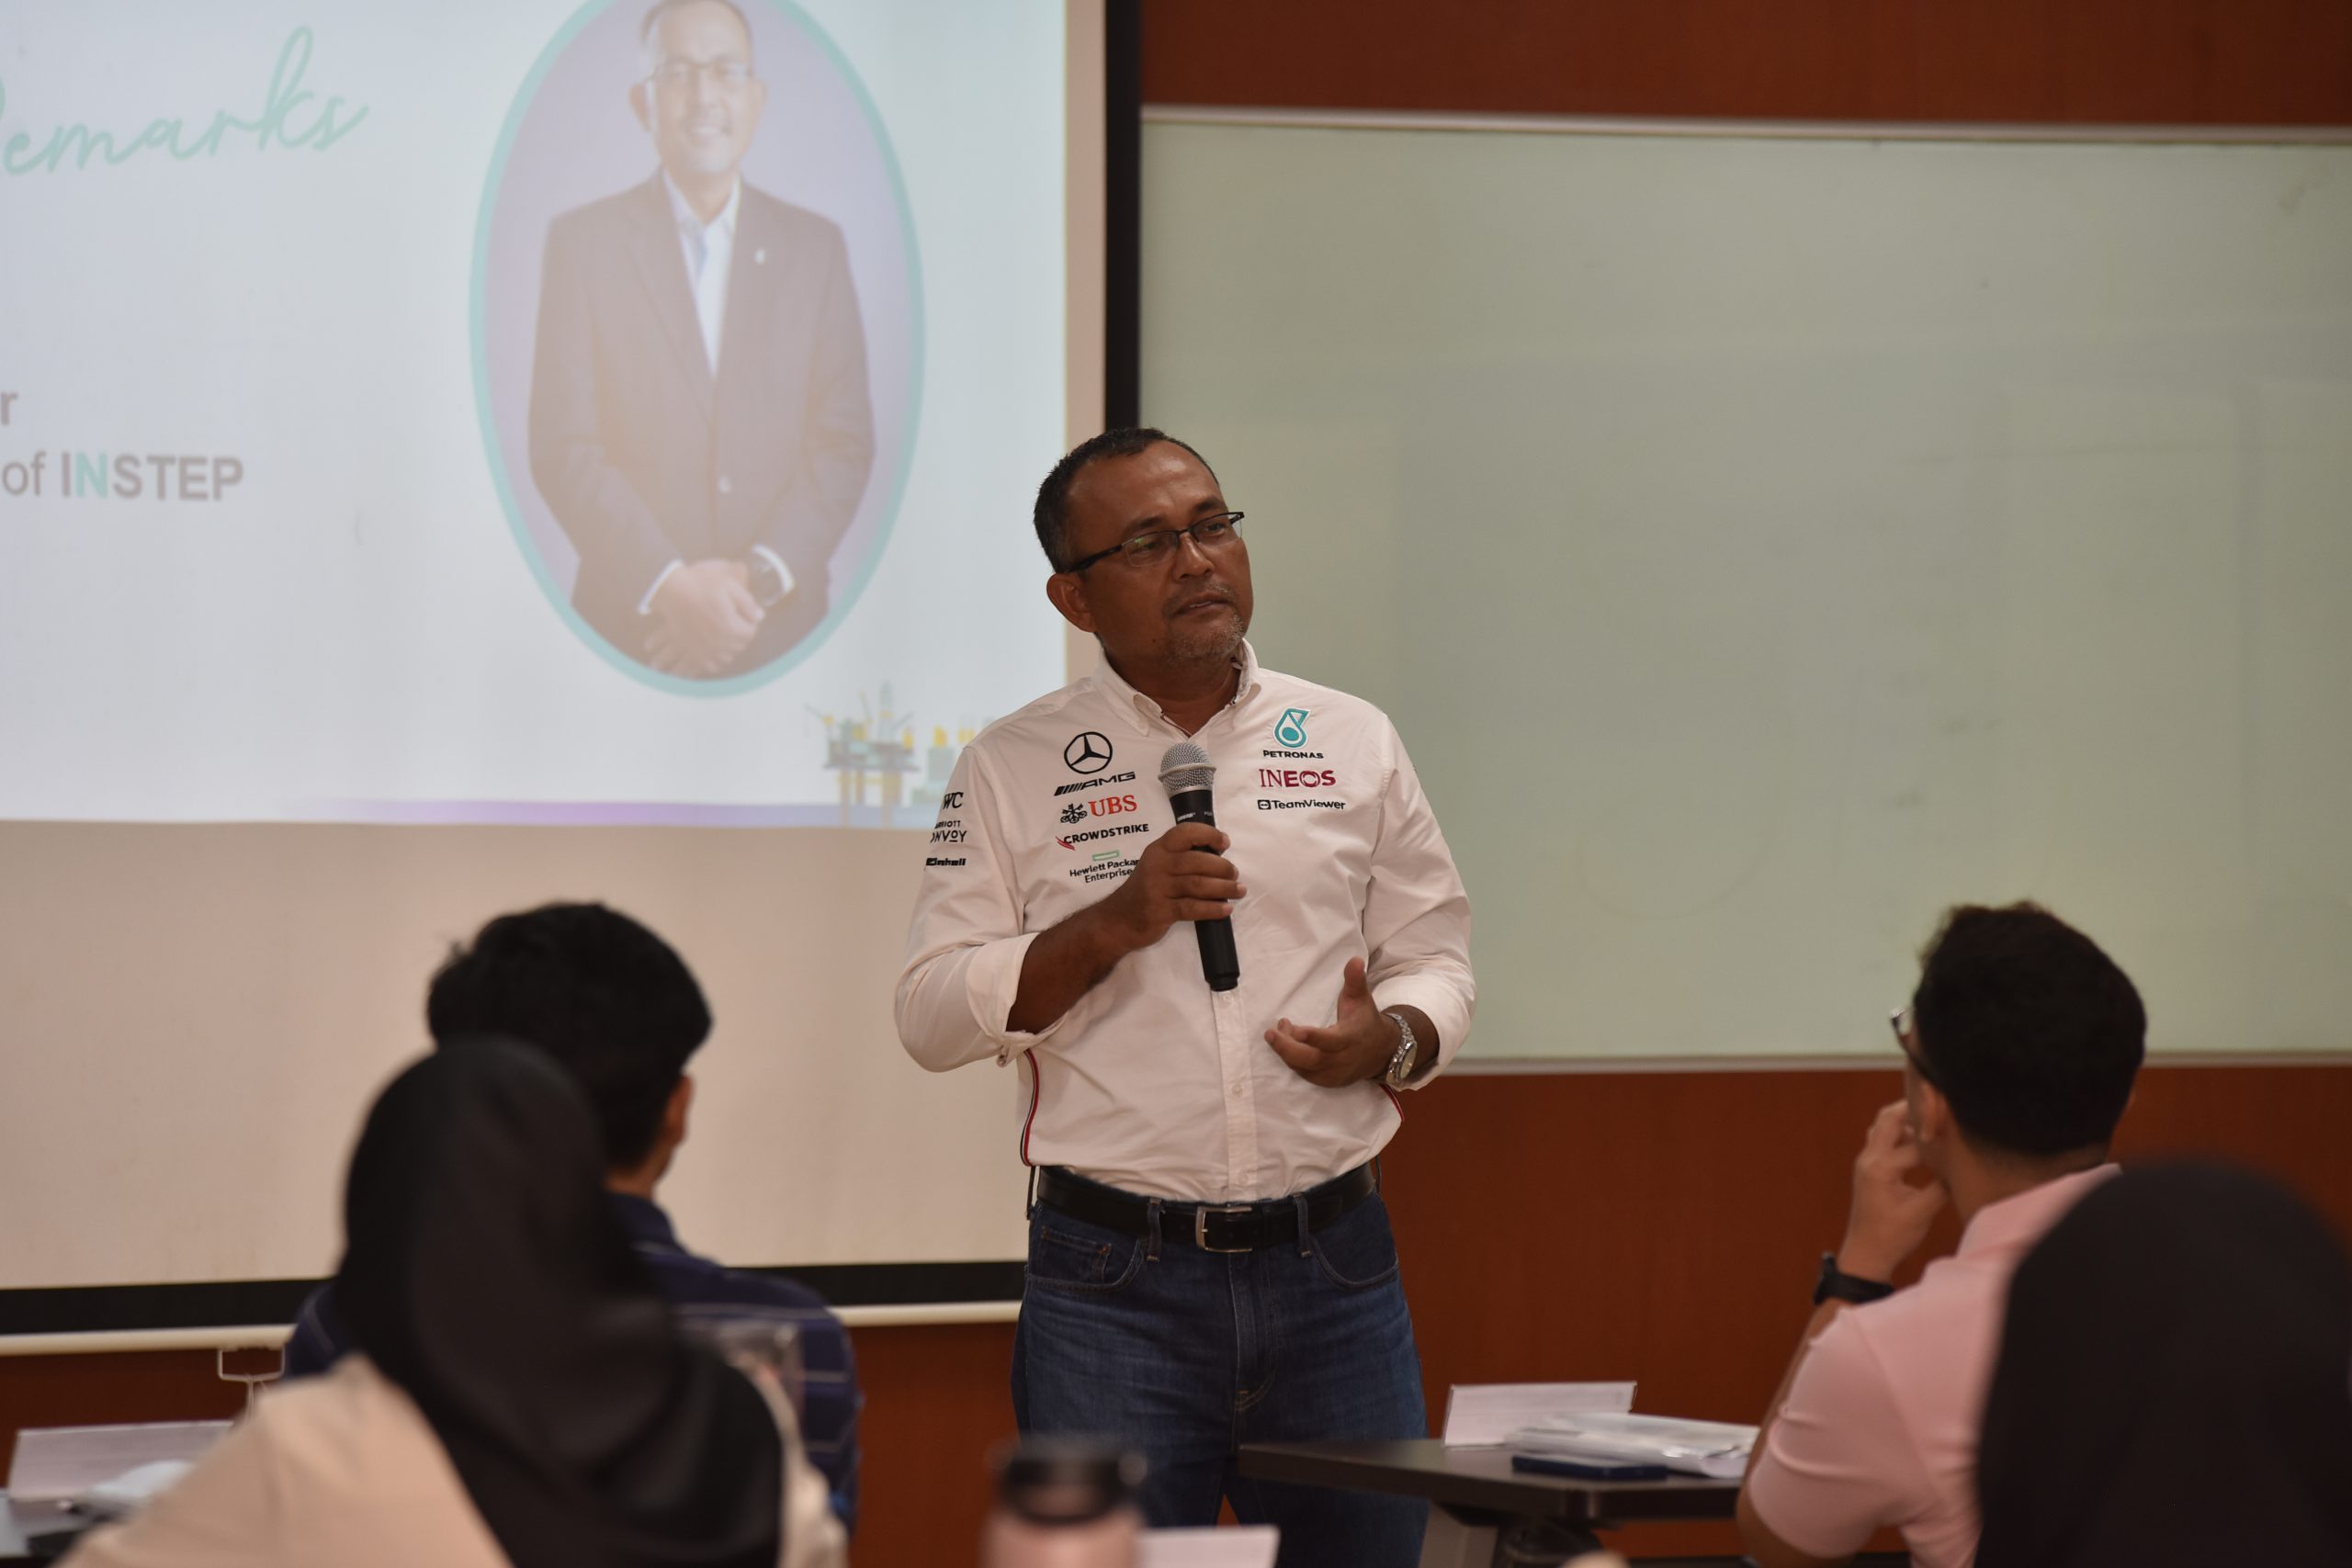 Chief Executive Officer of INSTEP, Encik Mohamad bin Nasir during a sharing with the participants.